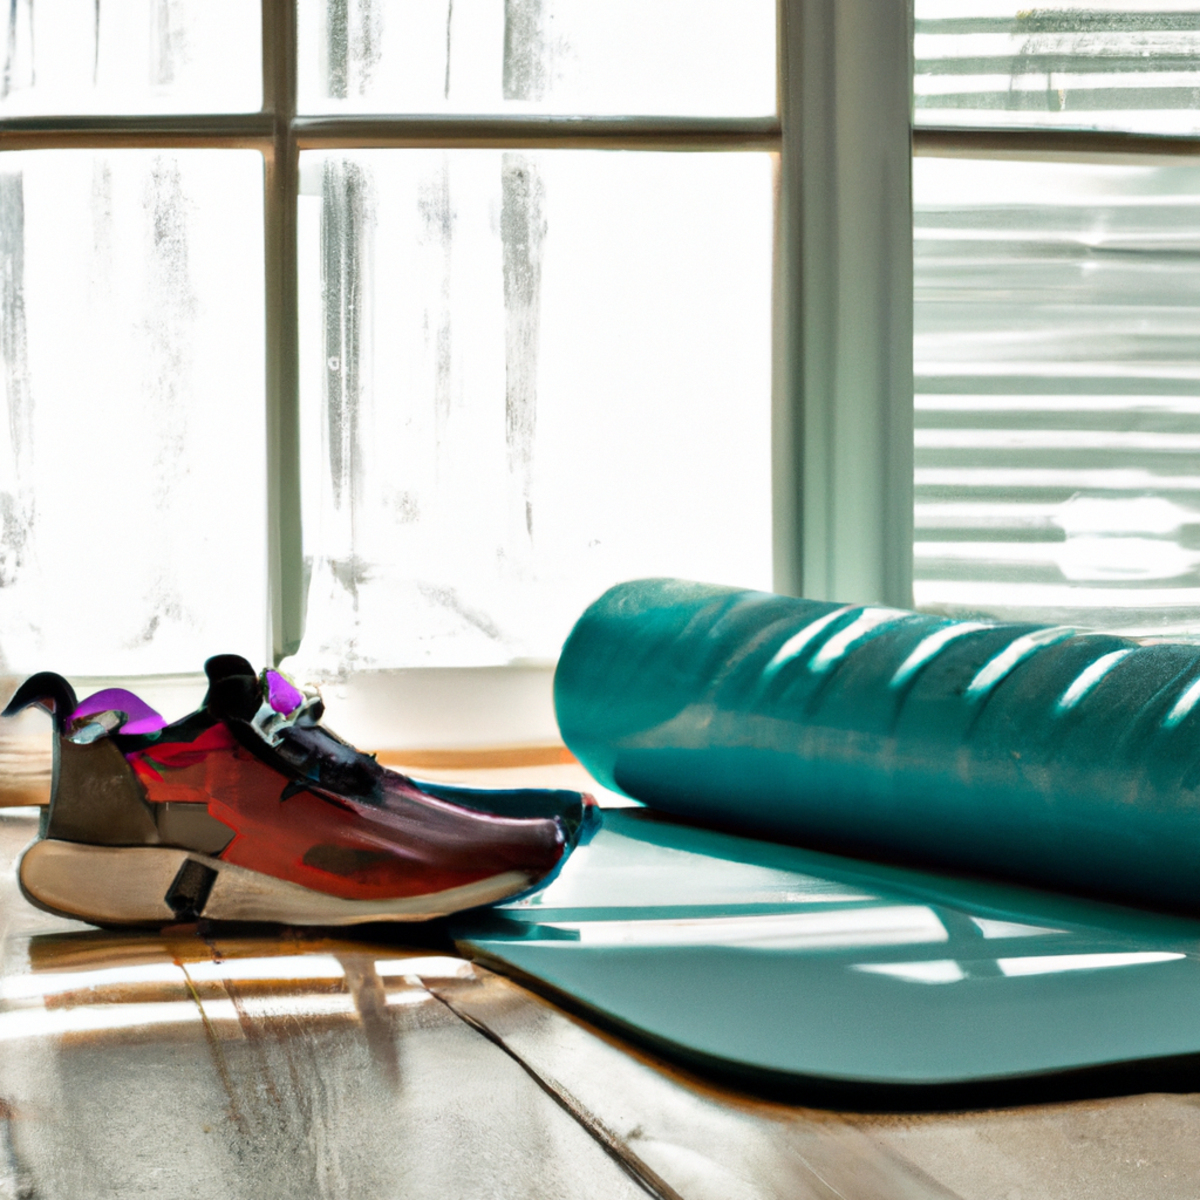 The photo captures a yoga mat laid out on a wooden floor, with a pair of running shoes placed neatly beside it. A foam roller and resistance band are also visible, indicating the use of these tools in the athlete's training regimen. In the background, a large window allows natural light to flood the room, creating a serene and peaceful atmosphere. The simplicity of the objects in the photo highlights the importance of incorporating yoga and Pilates into an athlete's routine, emphasizing the power of these practices to enhance physical performance.